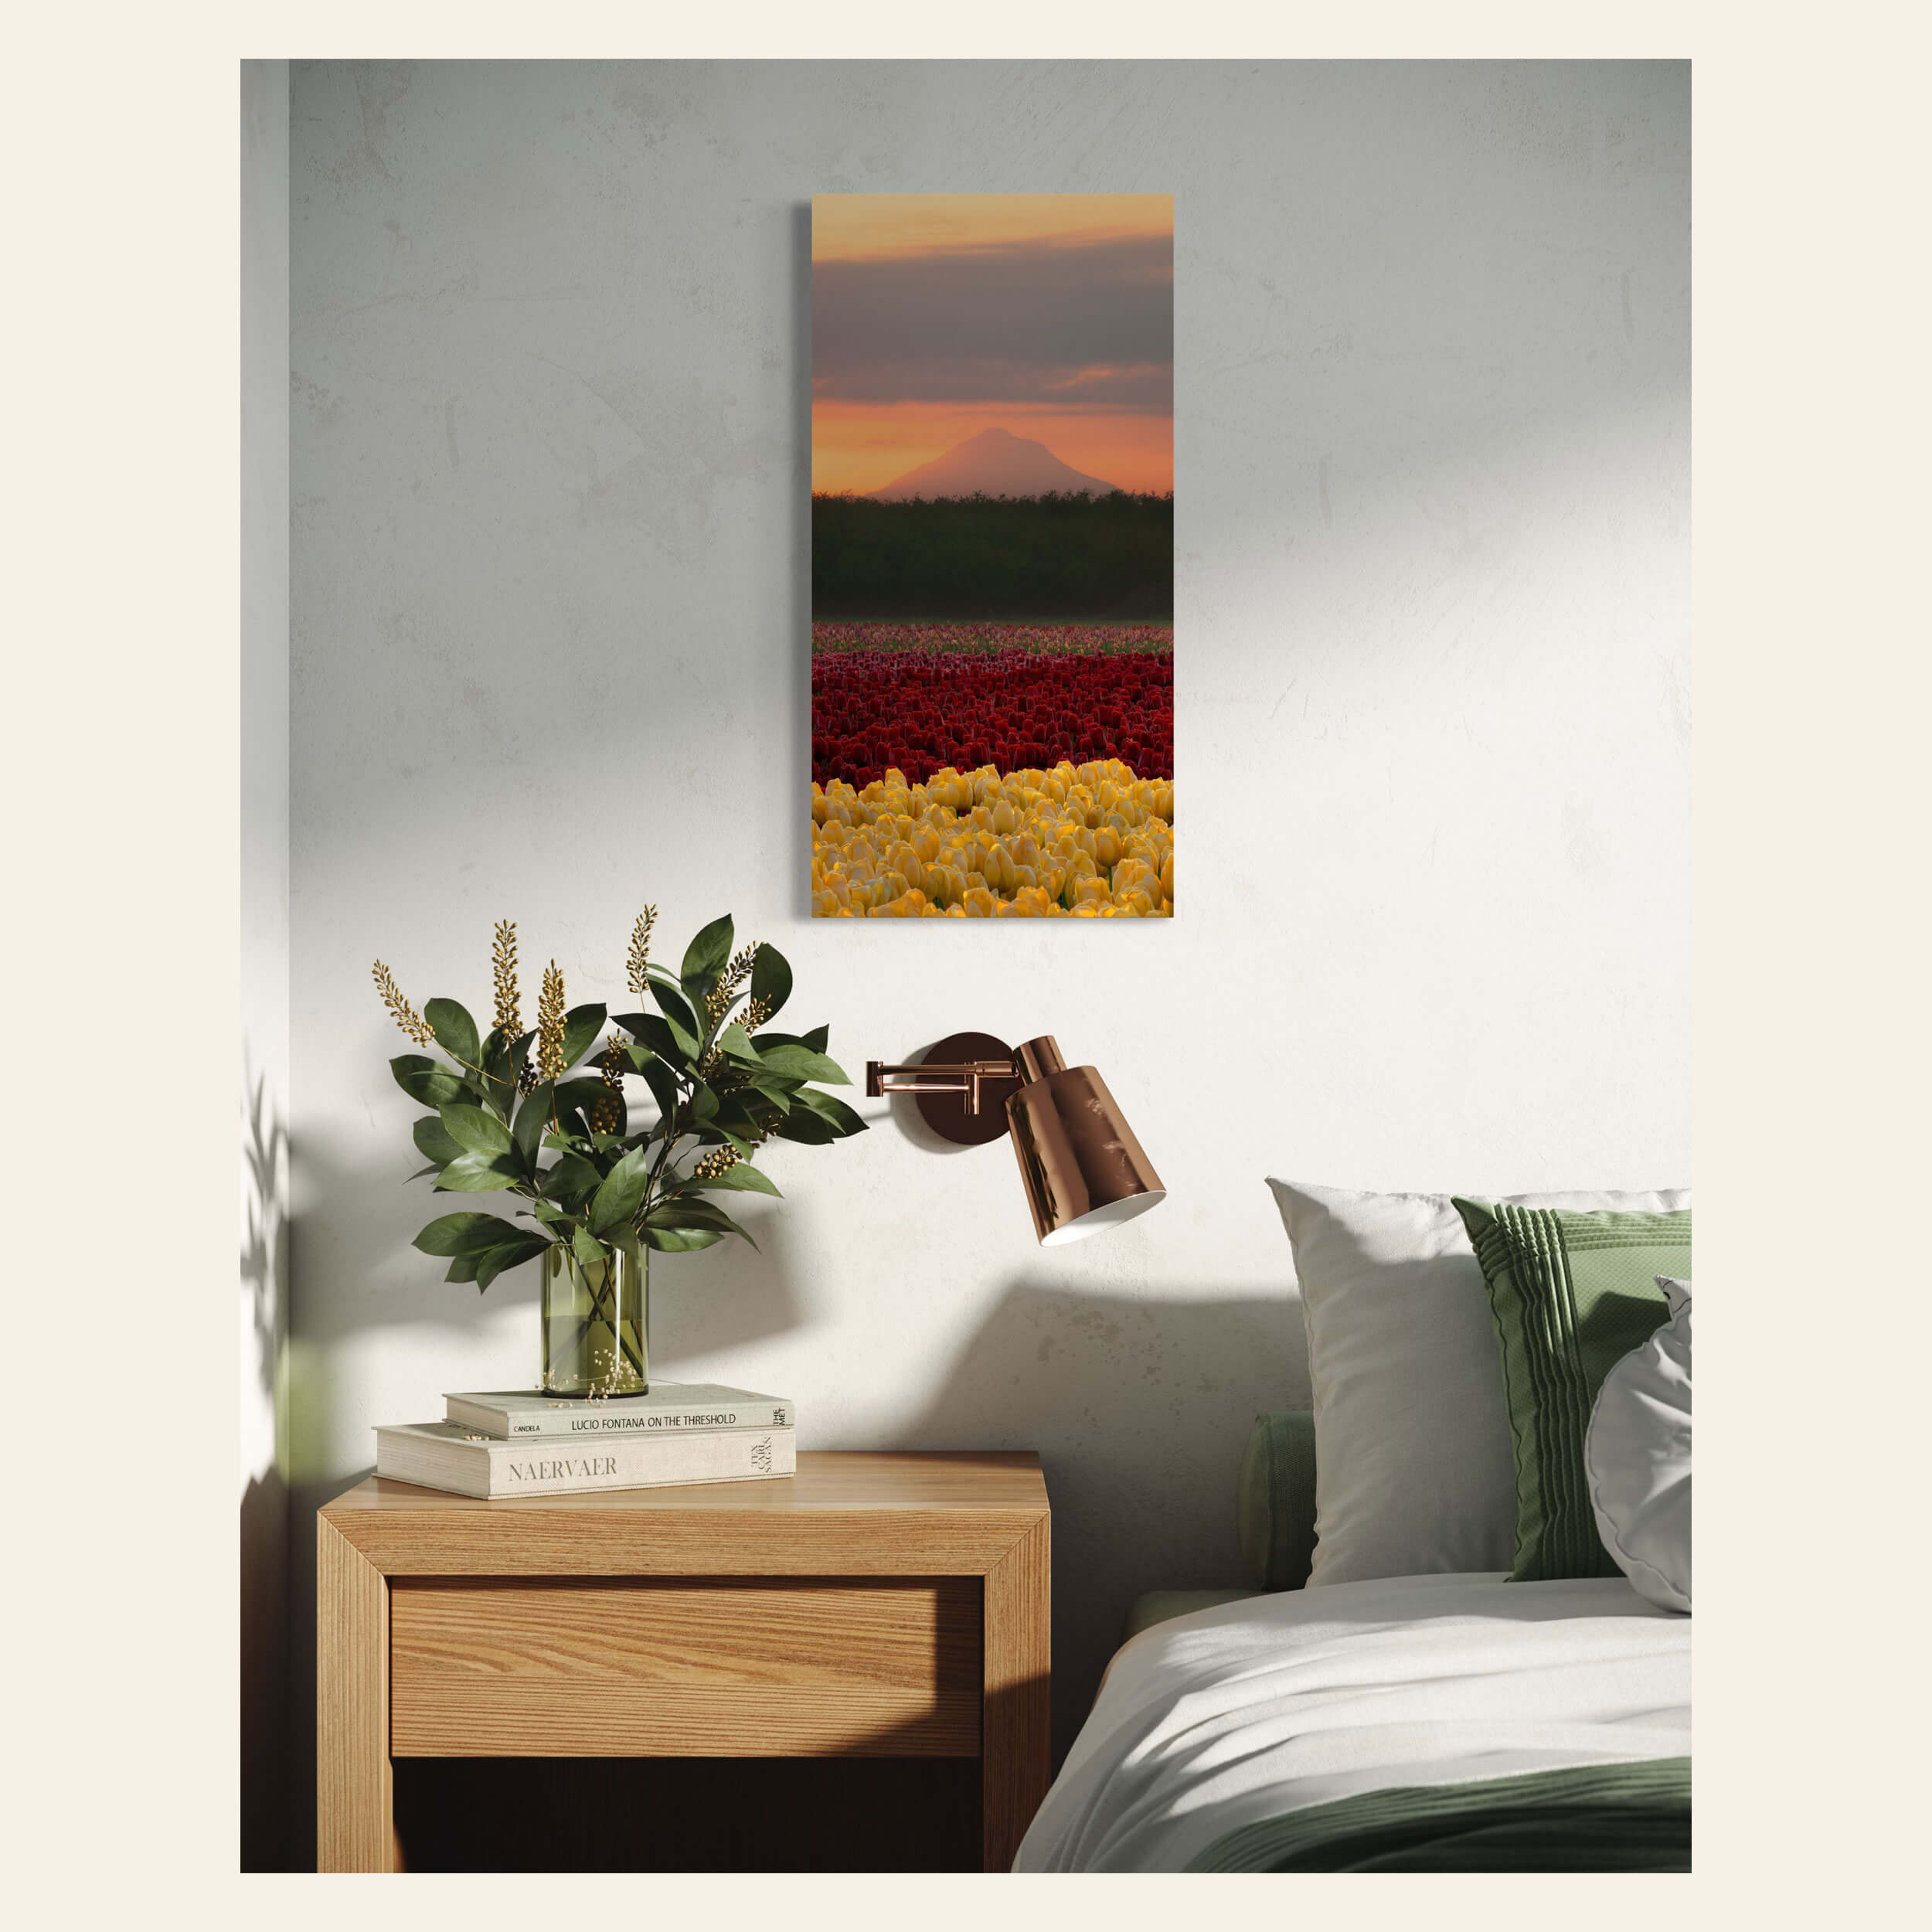 A sunrise picture from Wooden Shoe Tulip Farm hangs in a bedroom.